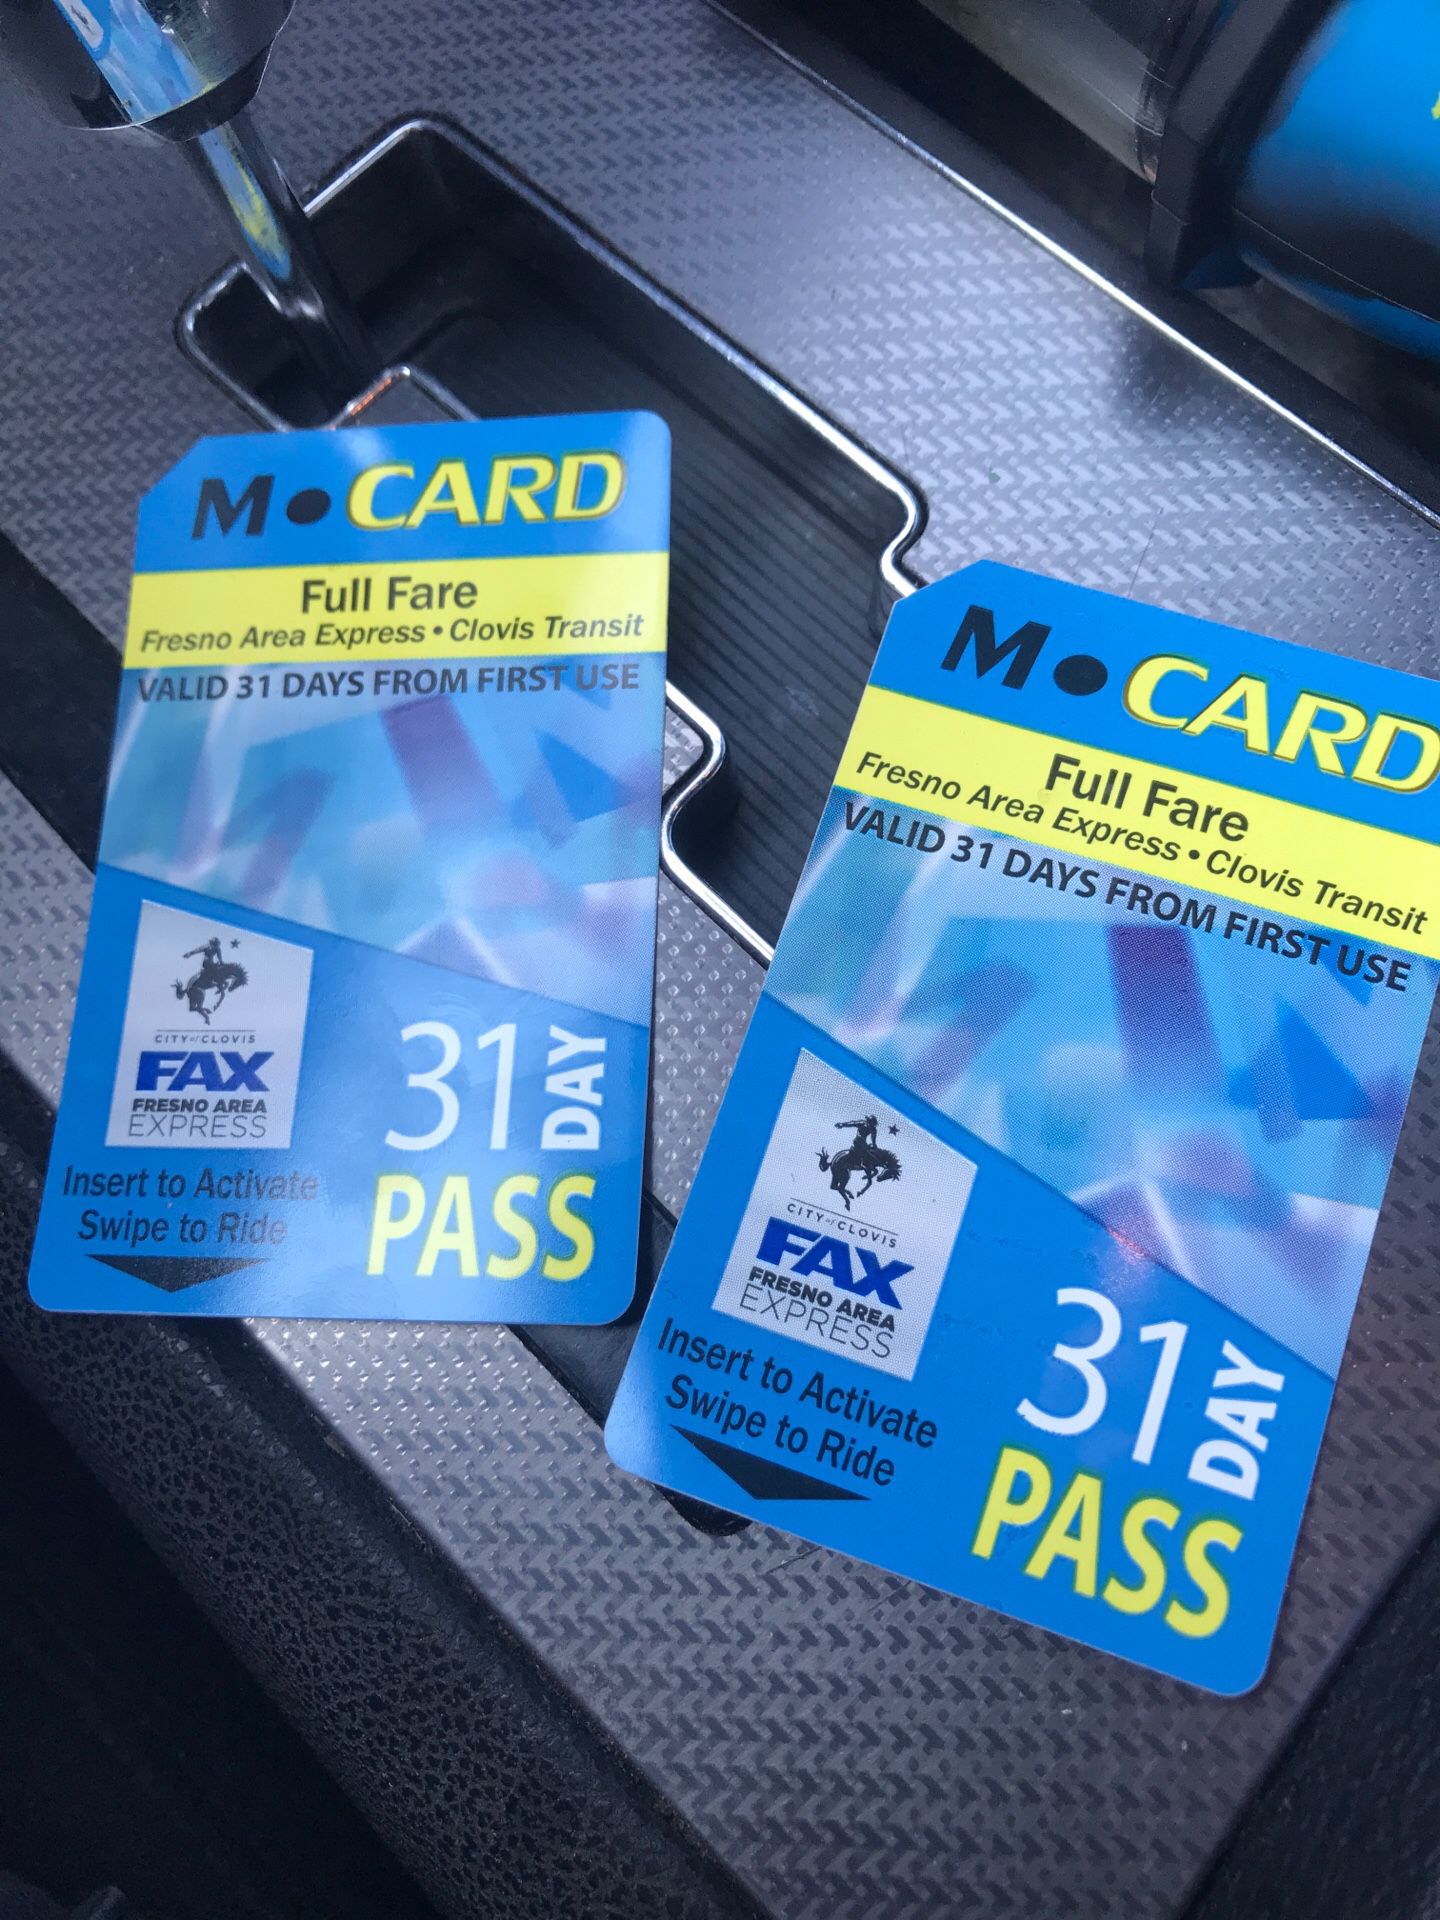 2 bus passes. Both for $40 or $25 each.